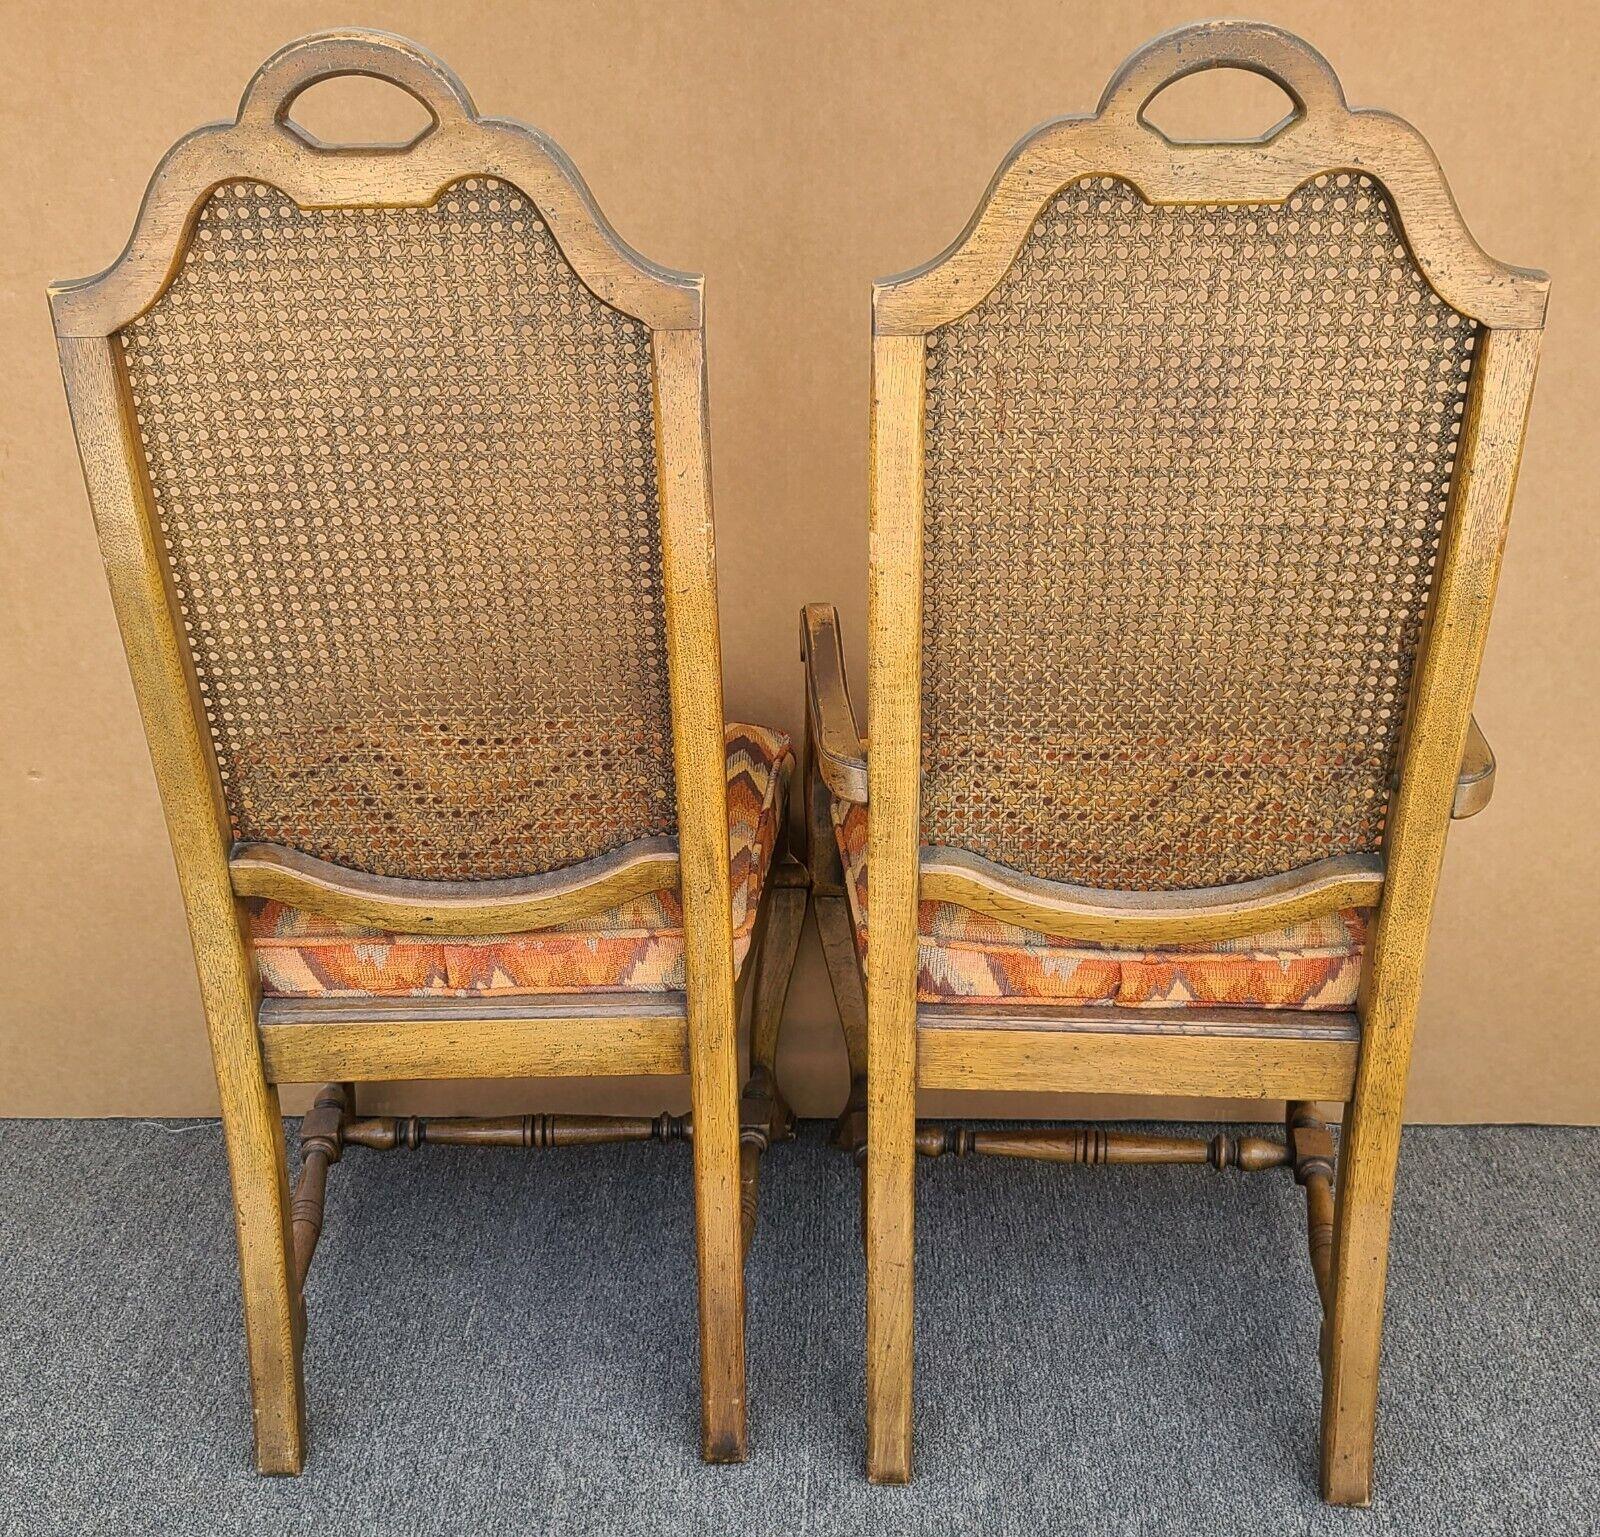 Vintage French Country Caned Back Dining Chairs - Set of 6 For Sale 1